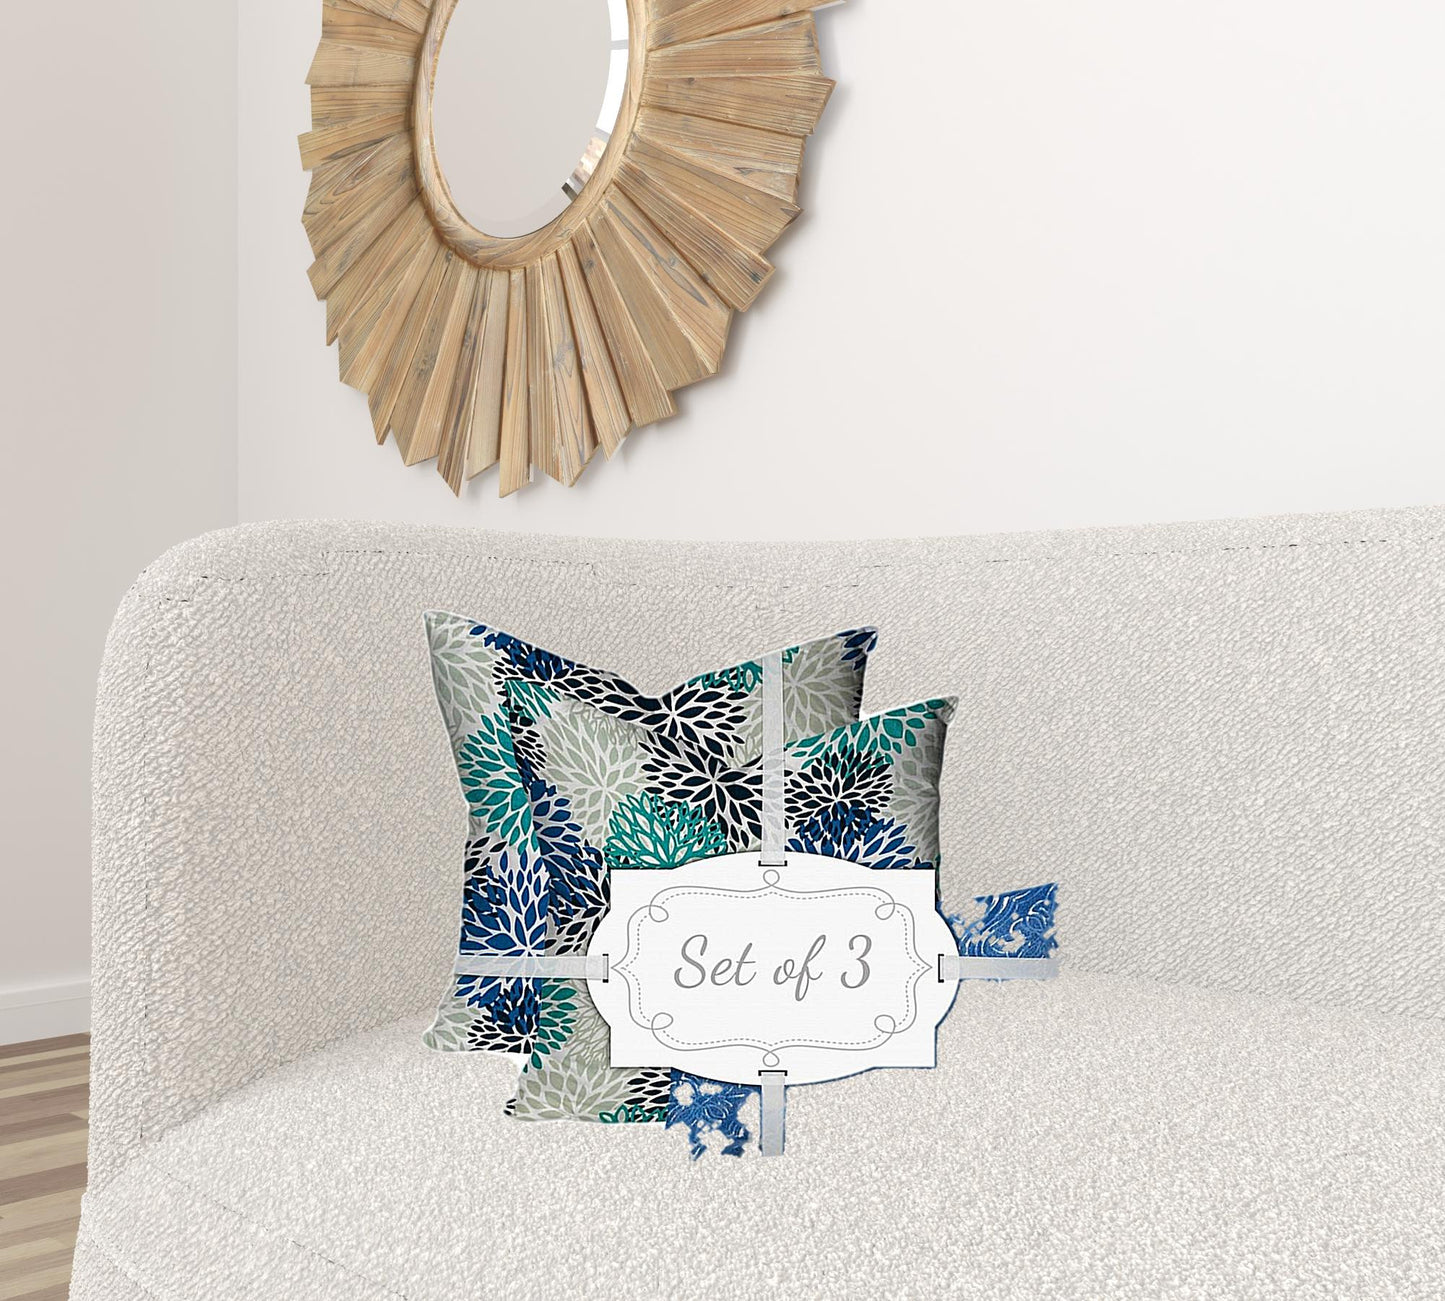 20" X 20" Blue And White Zippered Floral Throw Indoor Outdoor Pillow